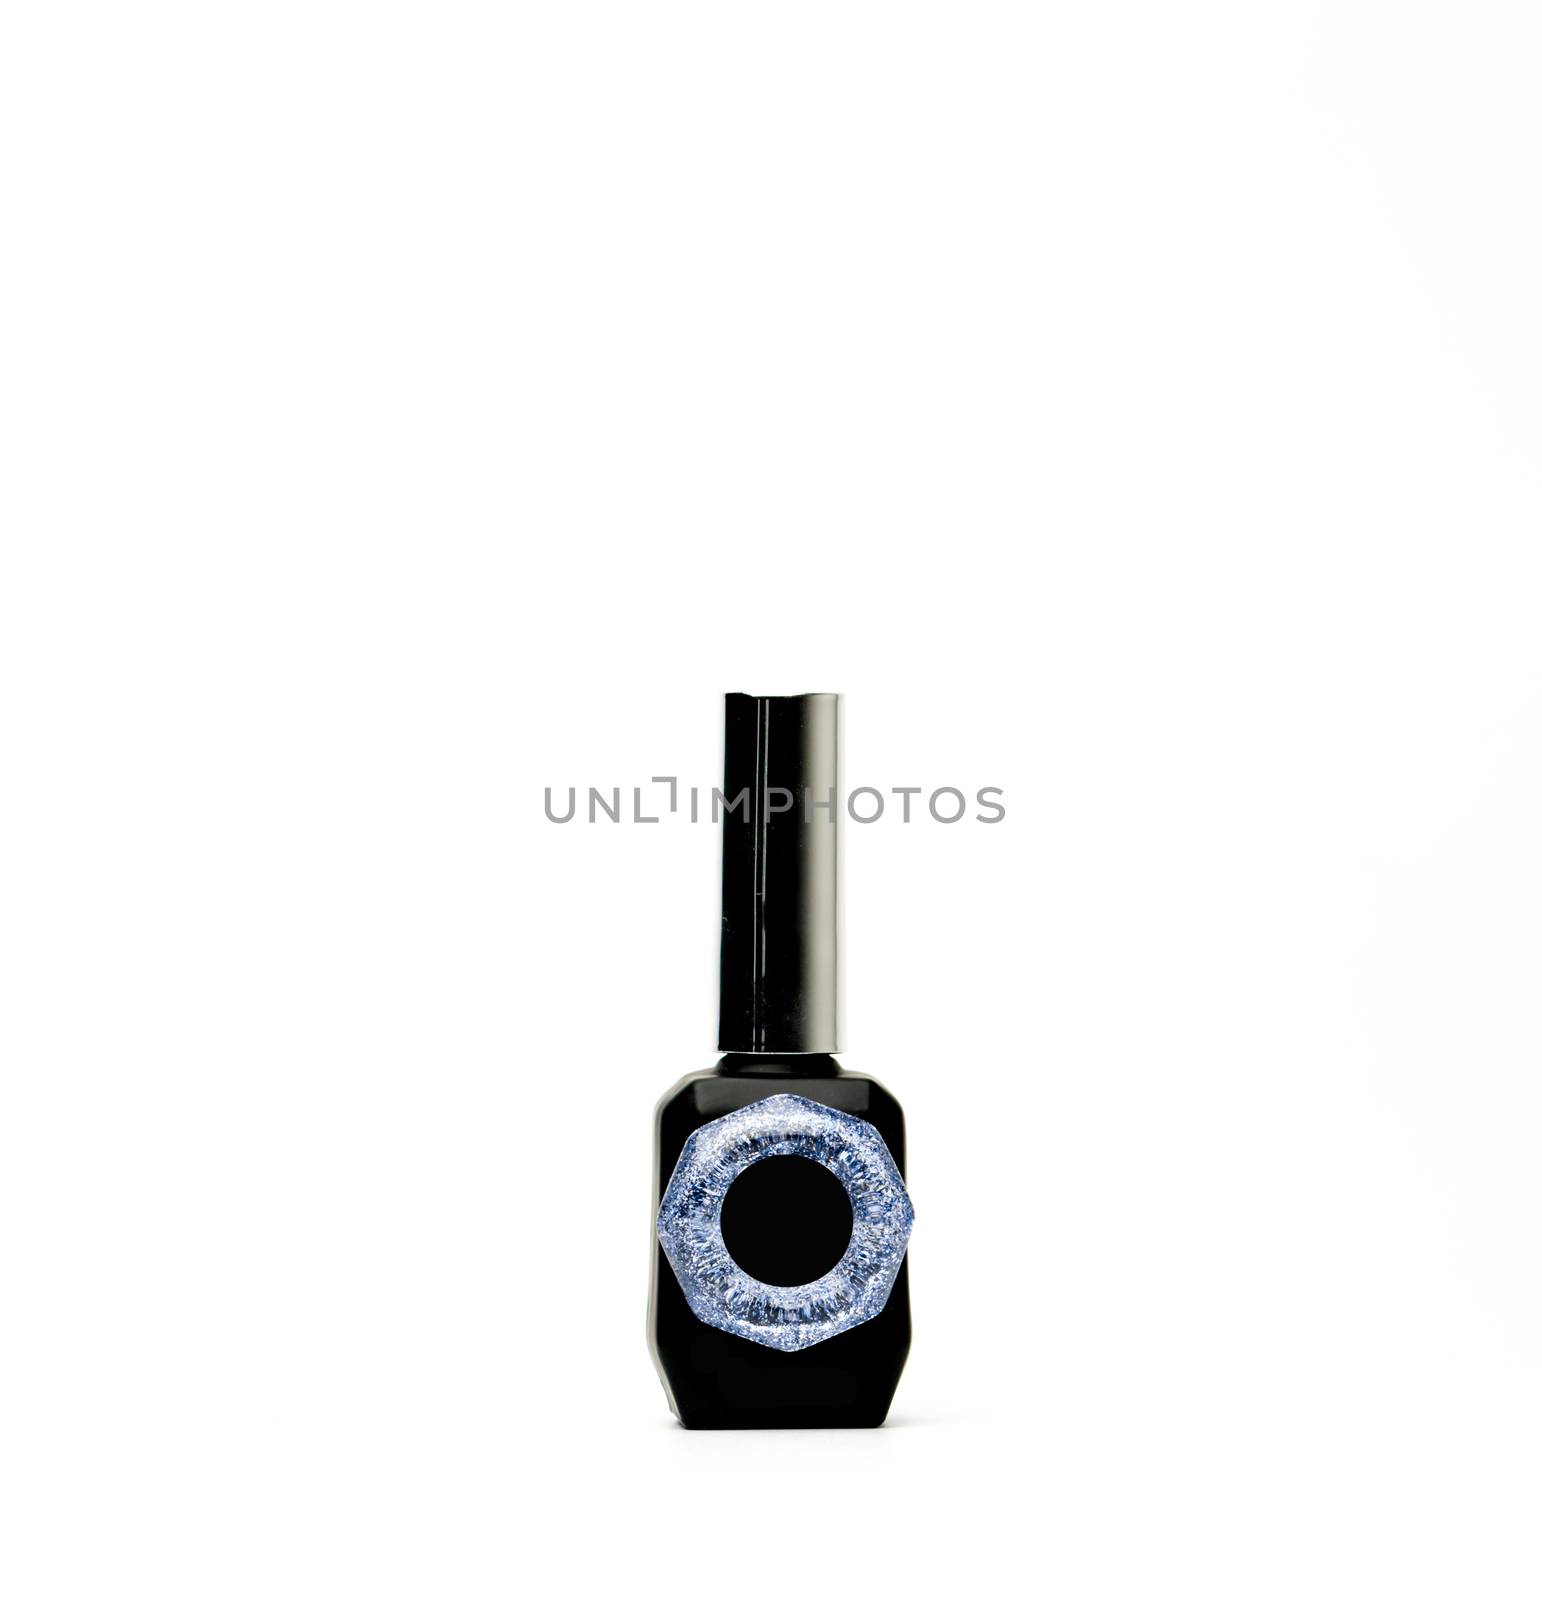 Unique nail polish bottle isolated on white background with copy space and blank label, just add your own text by Fahroni